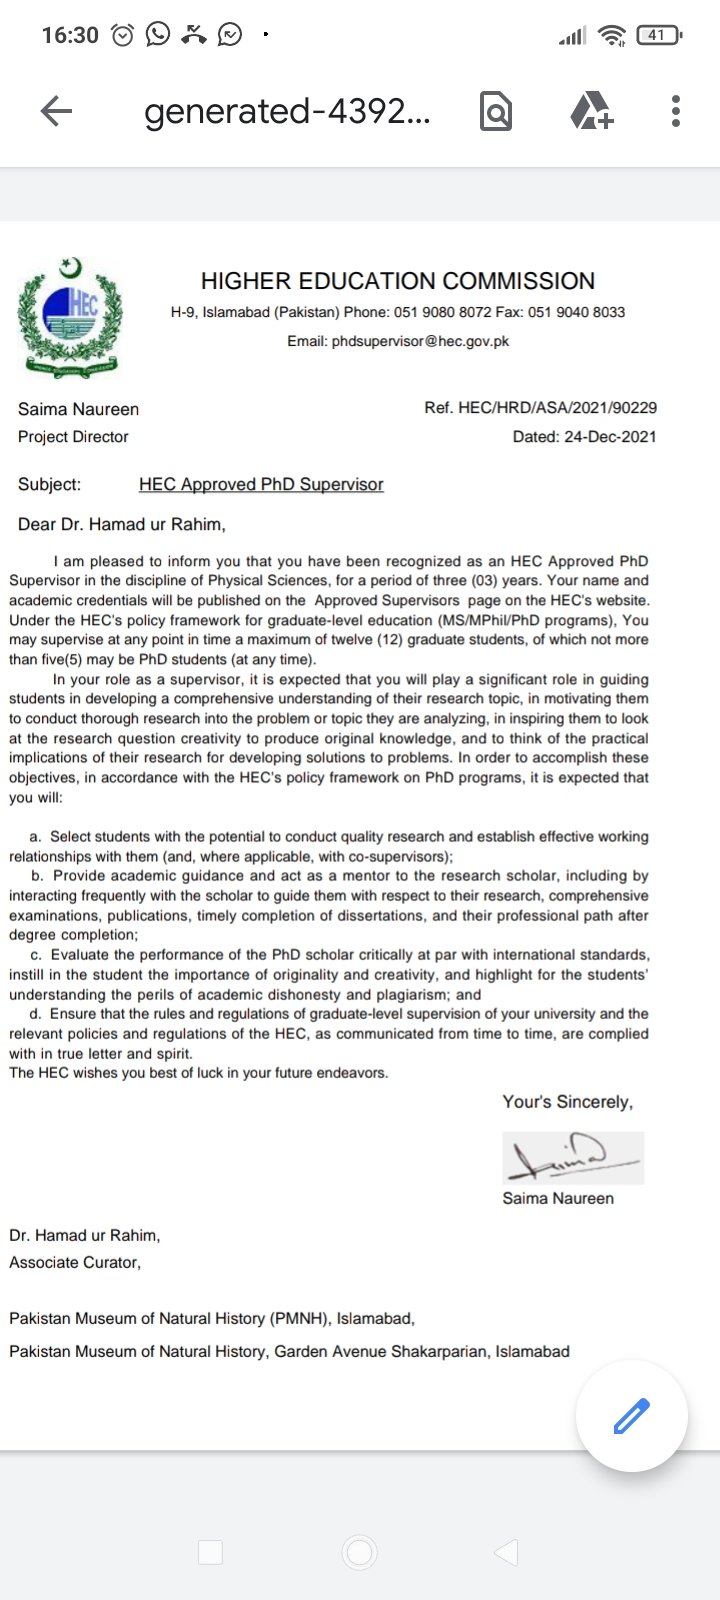 phd approved supervisor hec